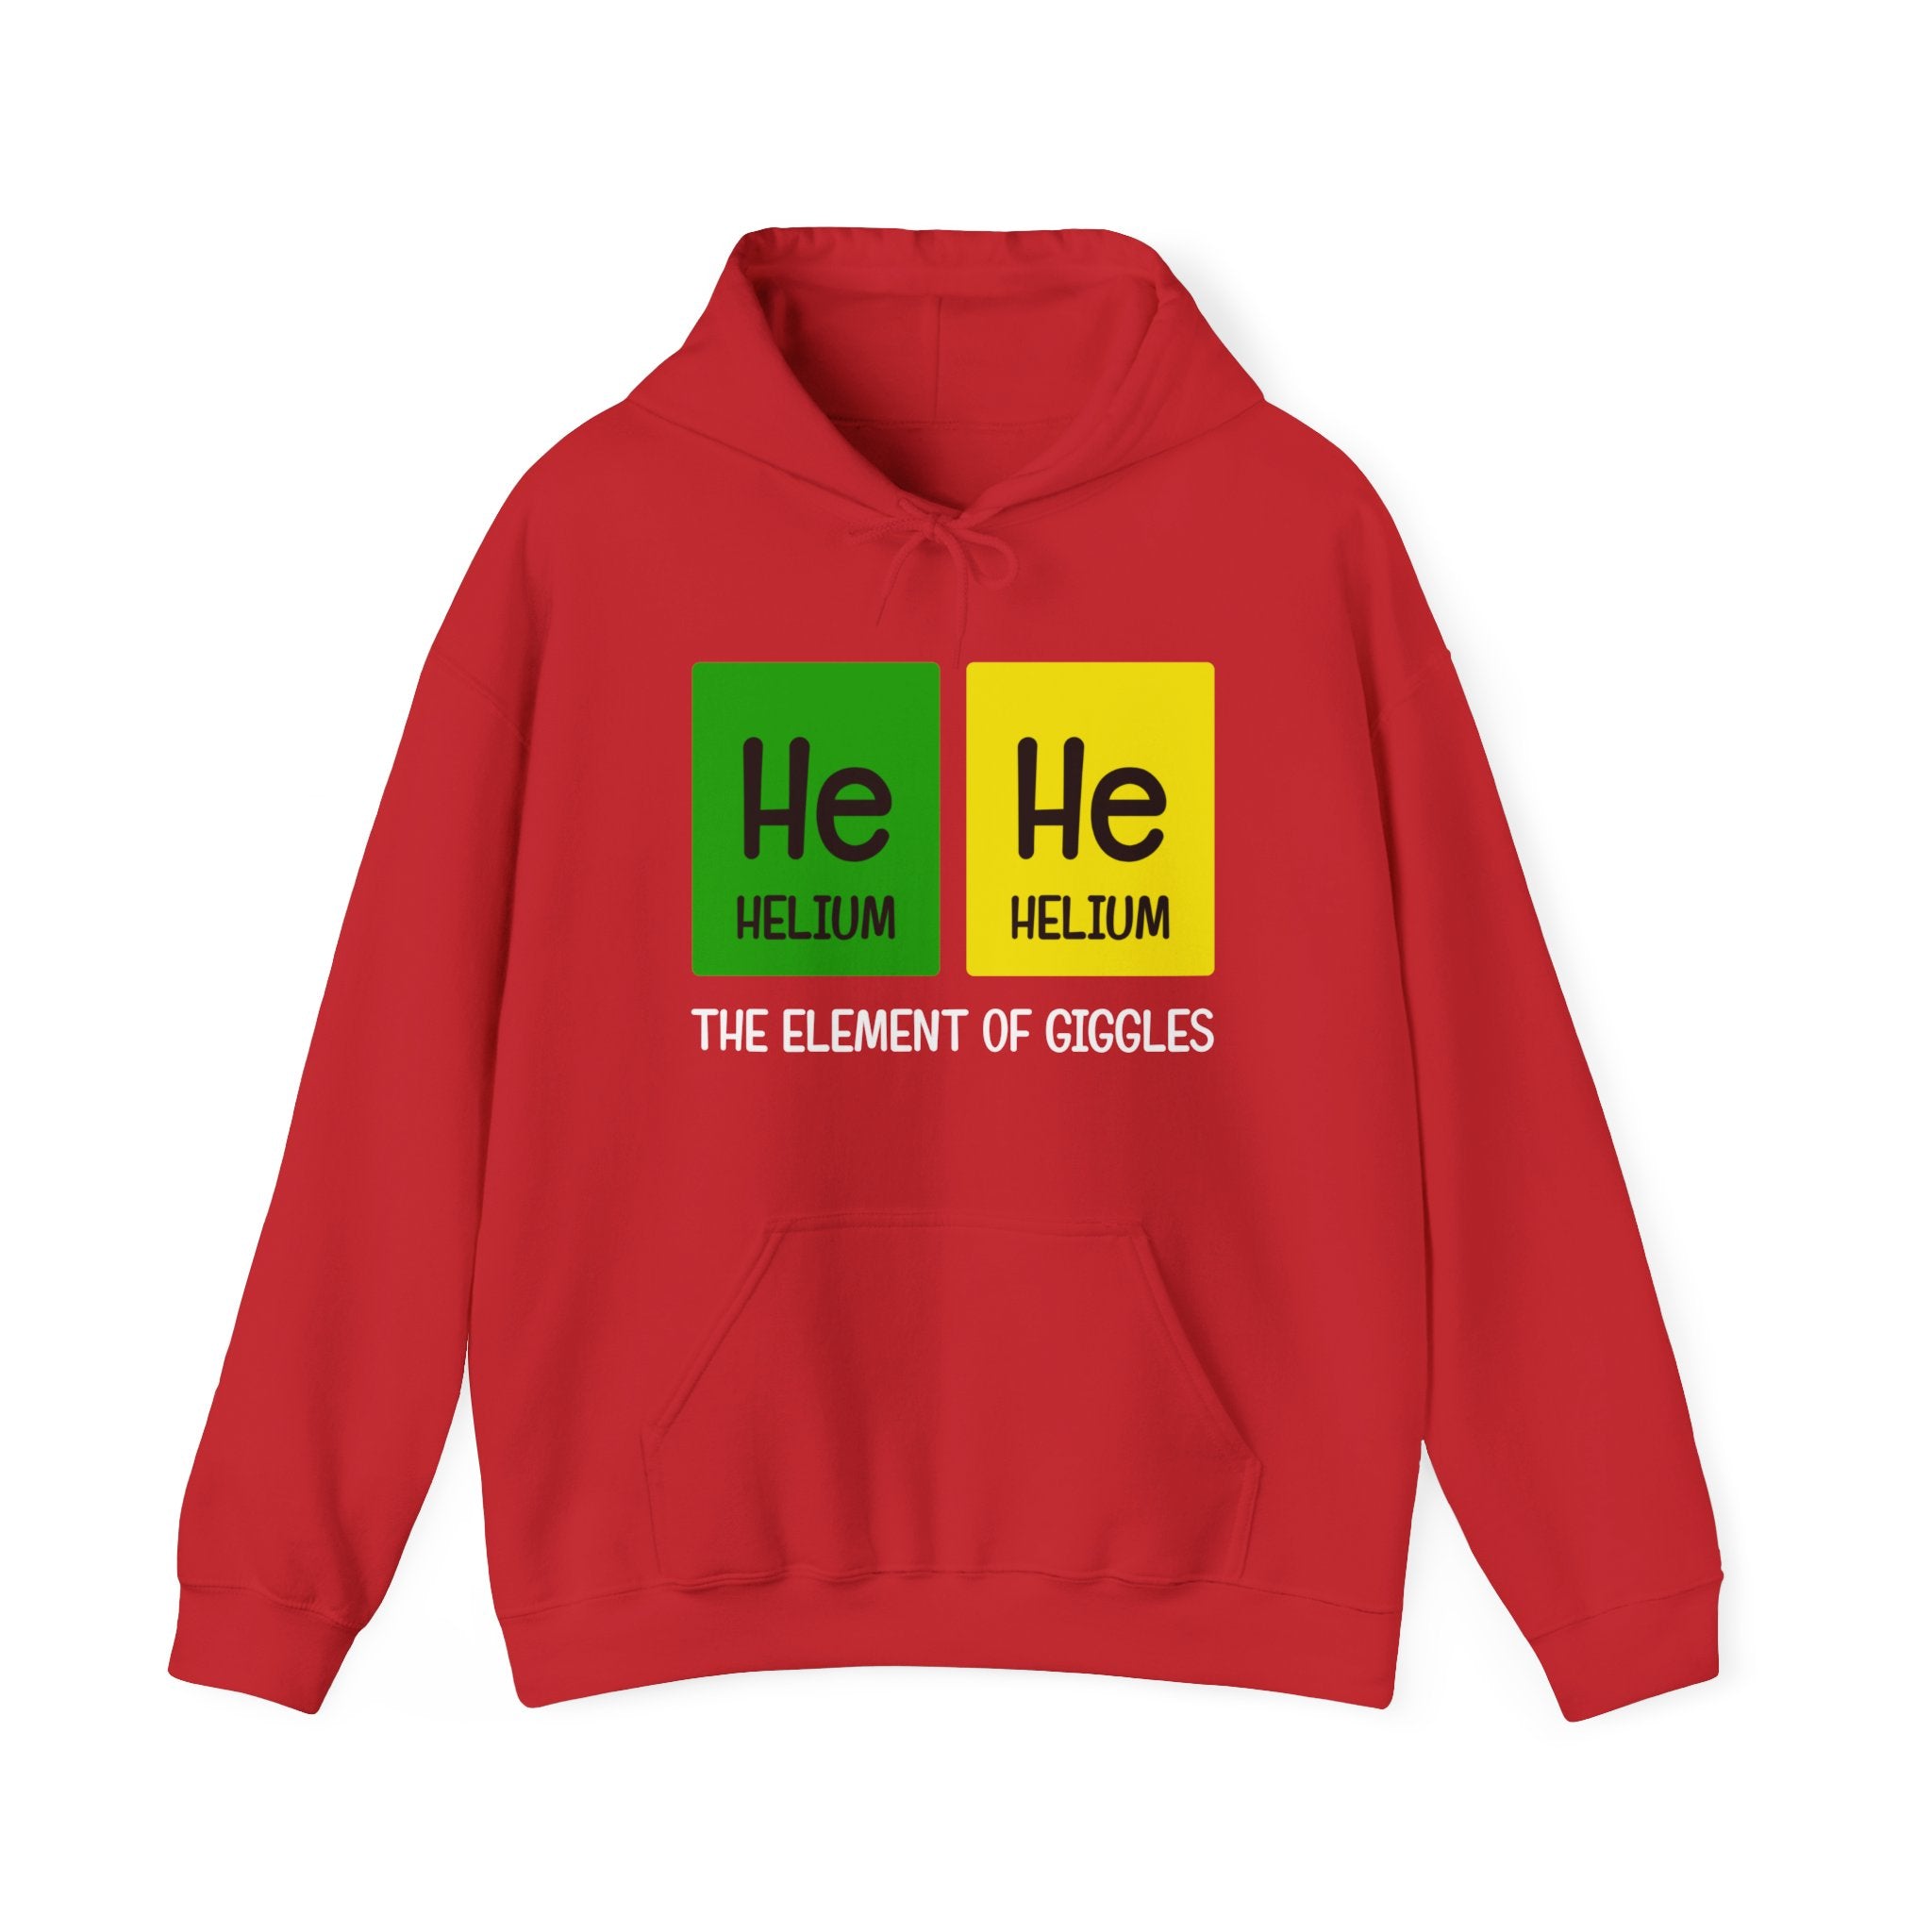 A stylish red He-He - Hooded Sweatshirt features a graphic of two periodic table squares marked "He, Helium" with the playful text "The Element of Giggles" below them.